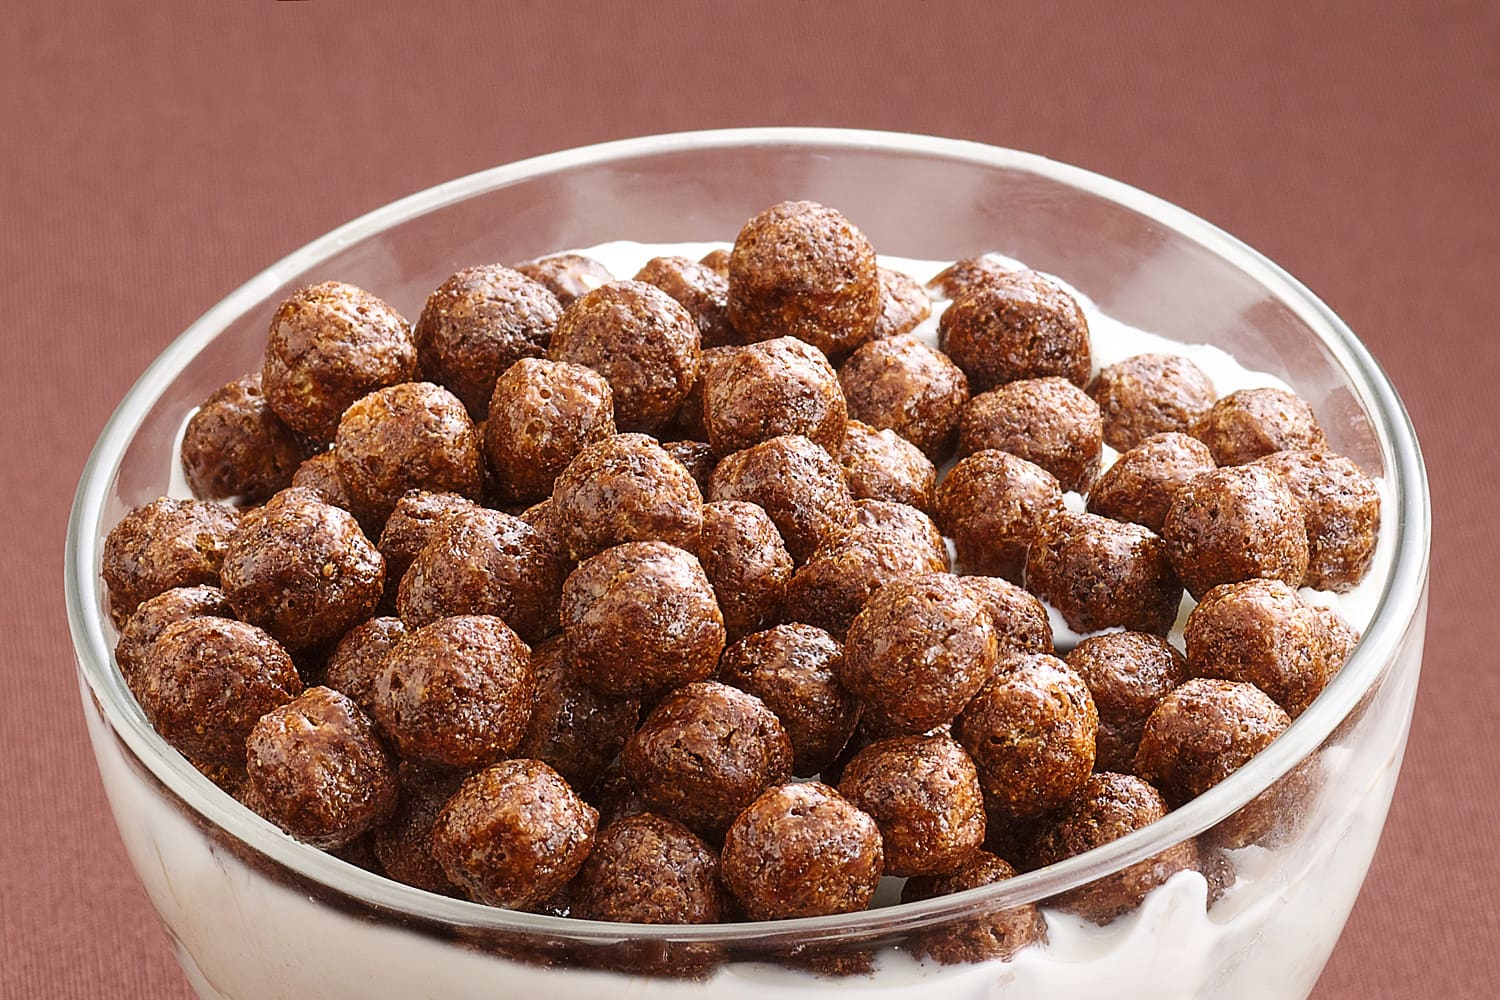 A glass bowl full of Cocoa Puffs cereal